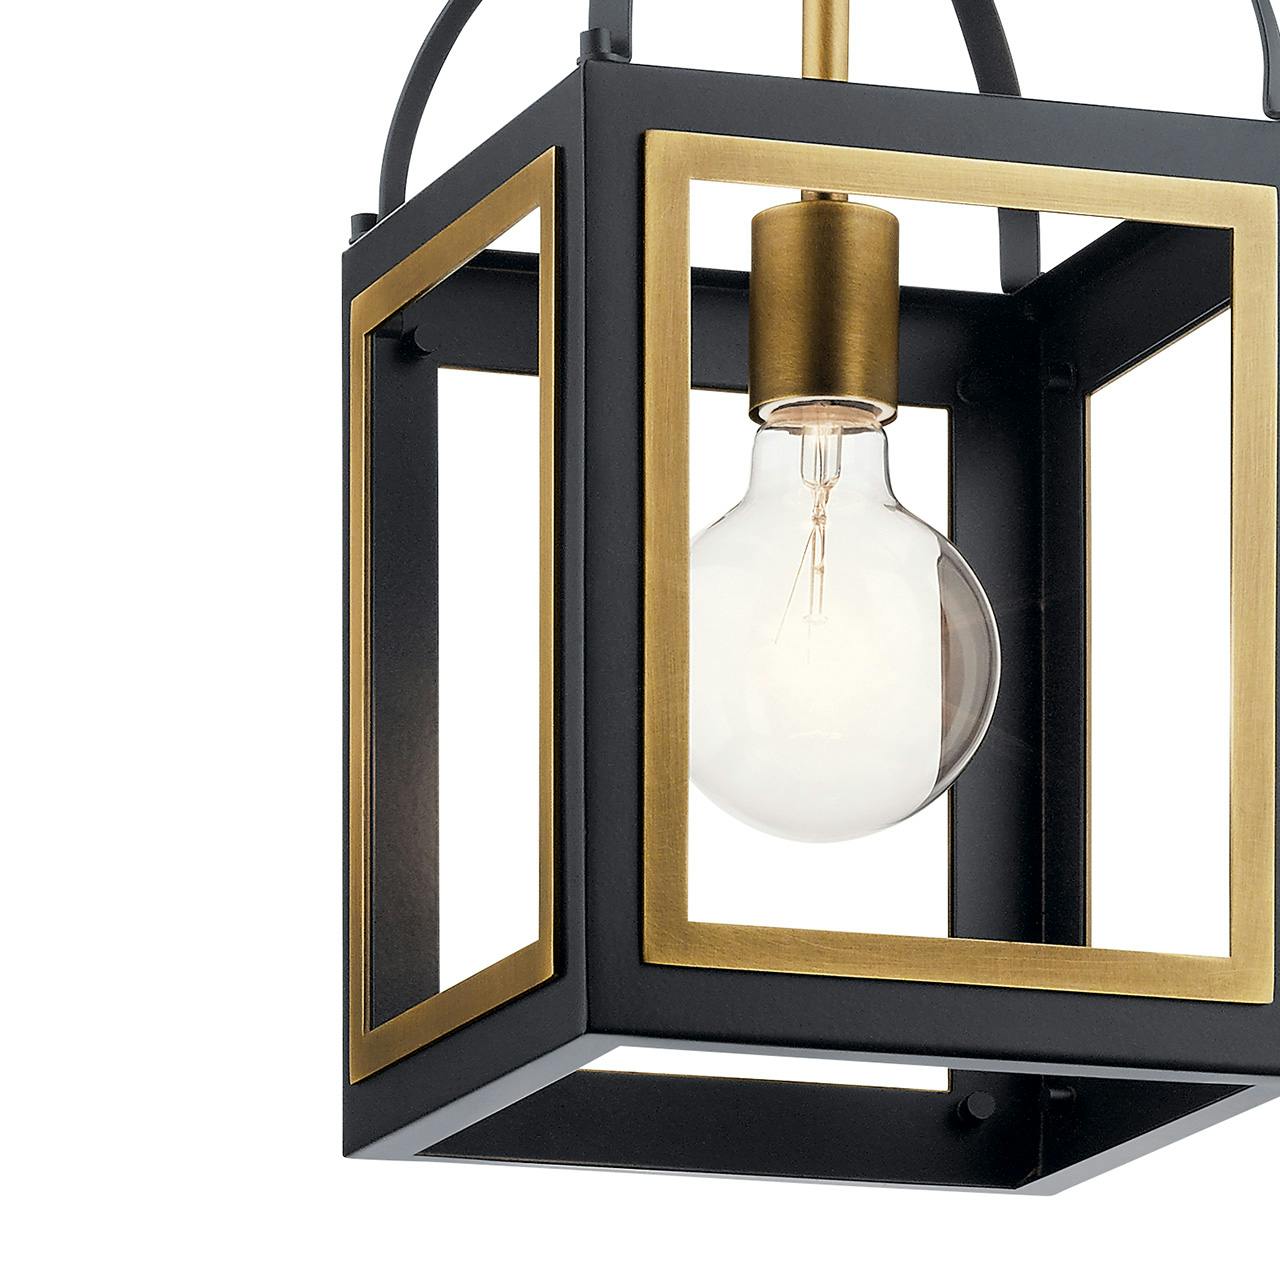 Close up view of the Vath 8" 1 Light Pendant Black & Brass on a white background